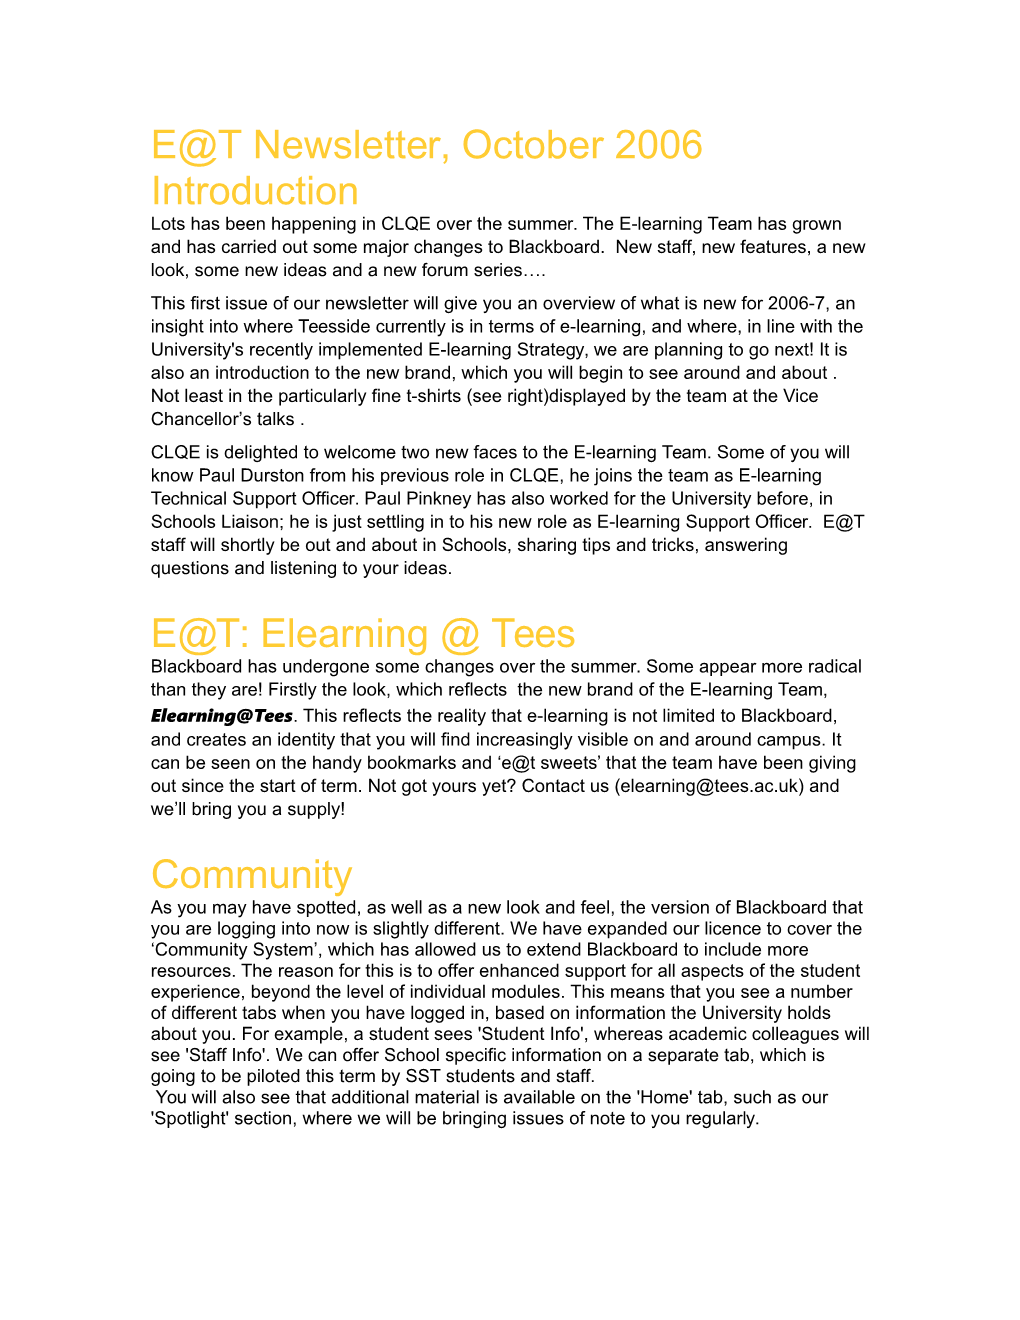 Lots Has Been Happening in CLQE Over the Summer. the E-Learning Team Has Grown and Has